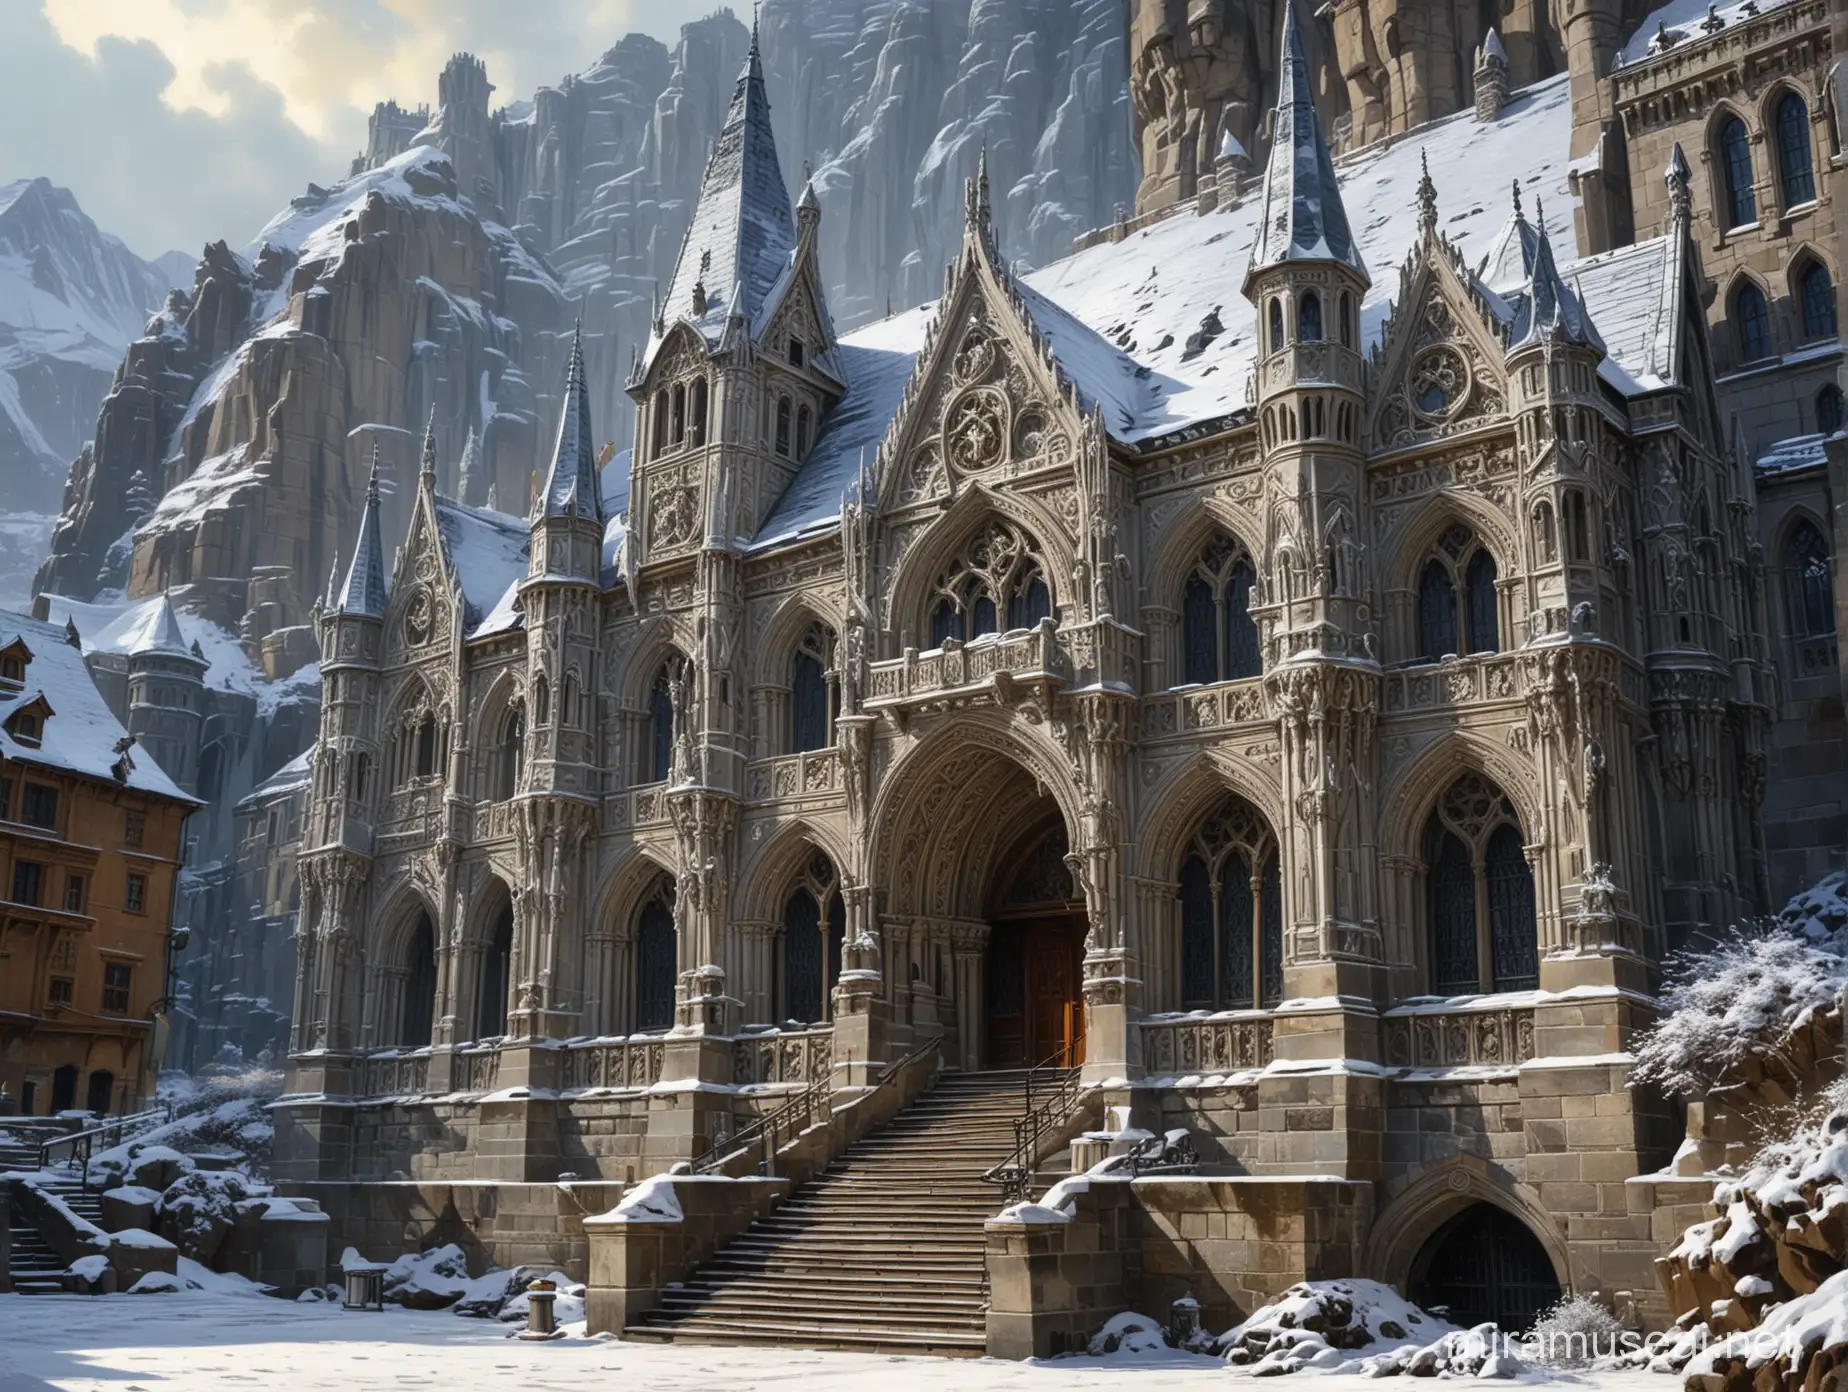 SnowCovered Gothic Merchant Guild Hall with Intricate Carvings